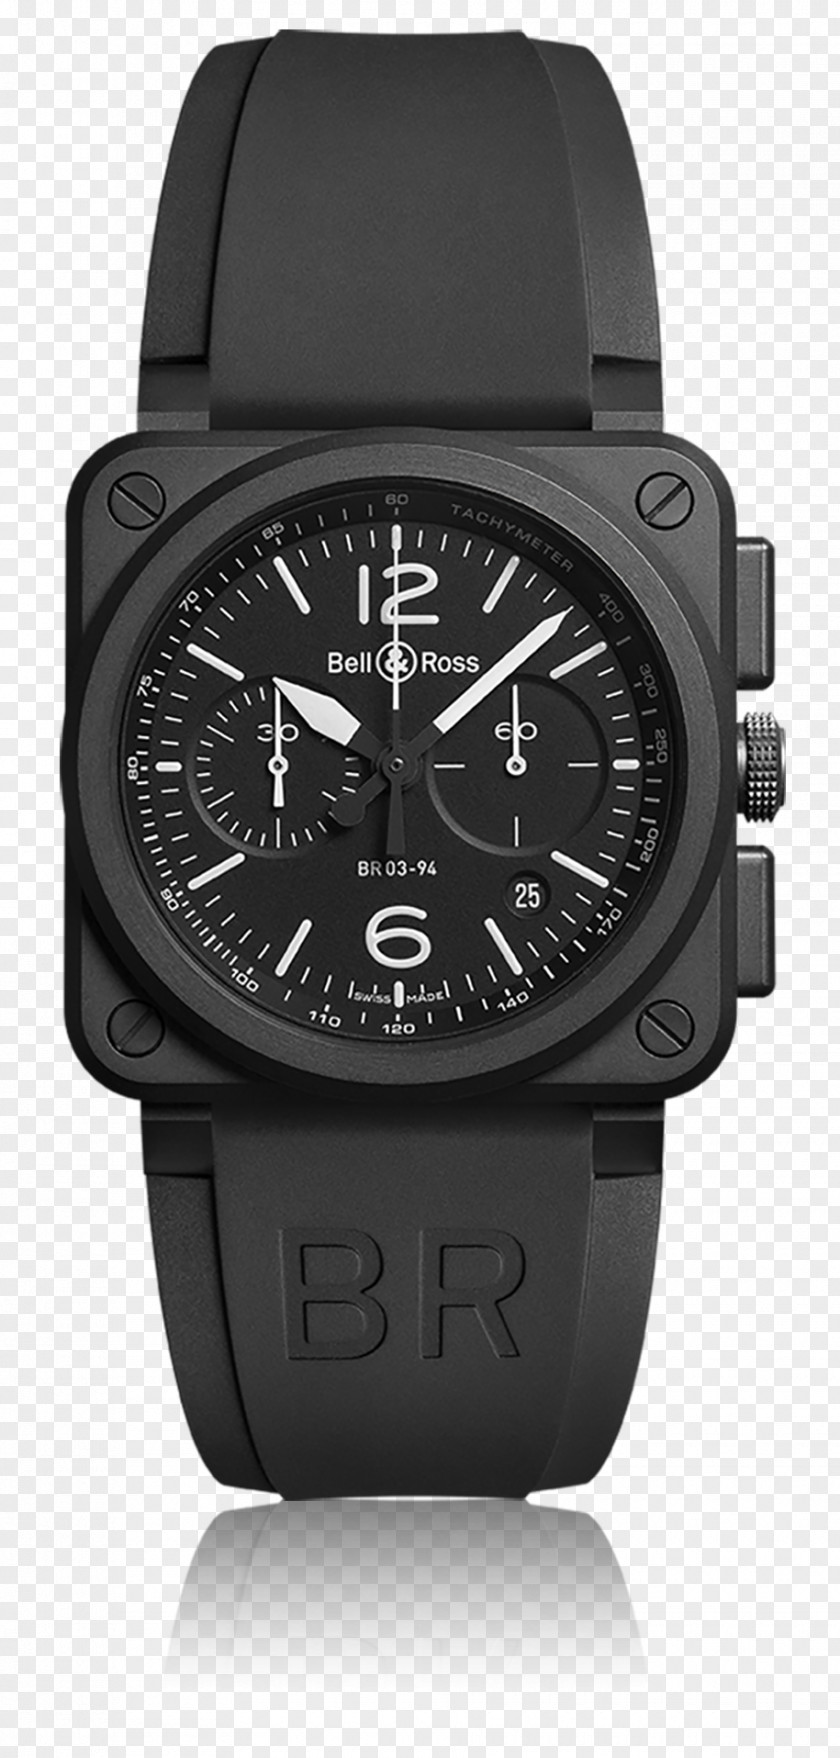 Watch Baselworld Bell & Ross, Inc. Chronograph PNG